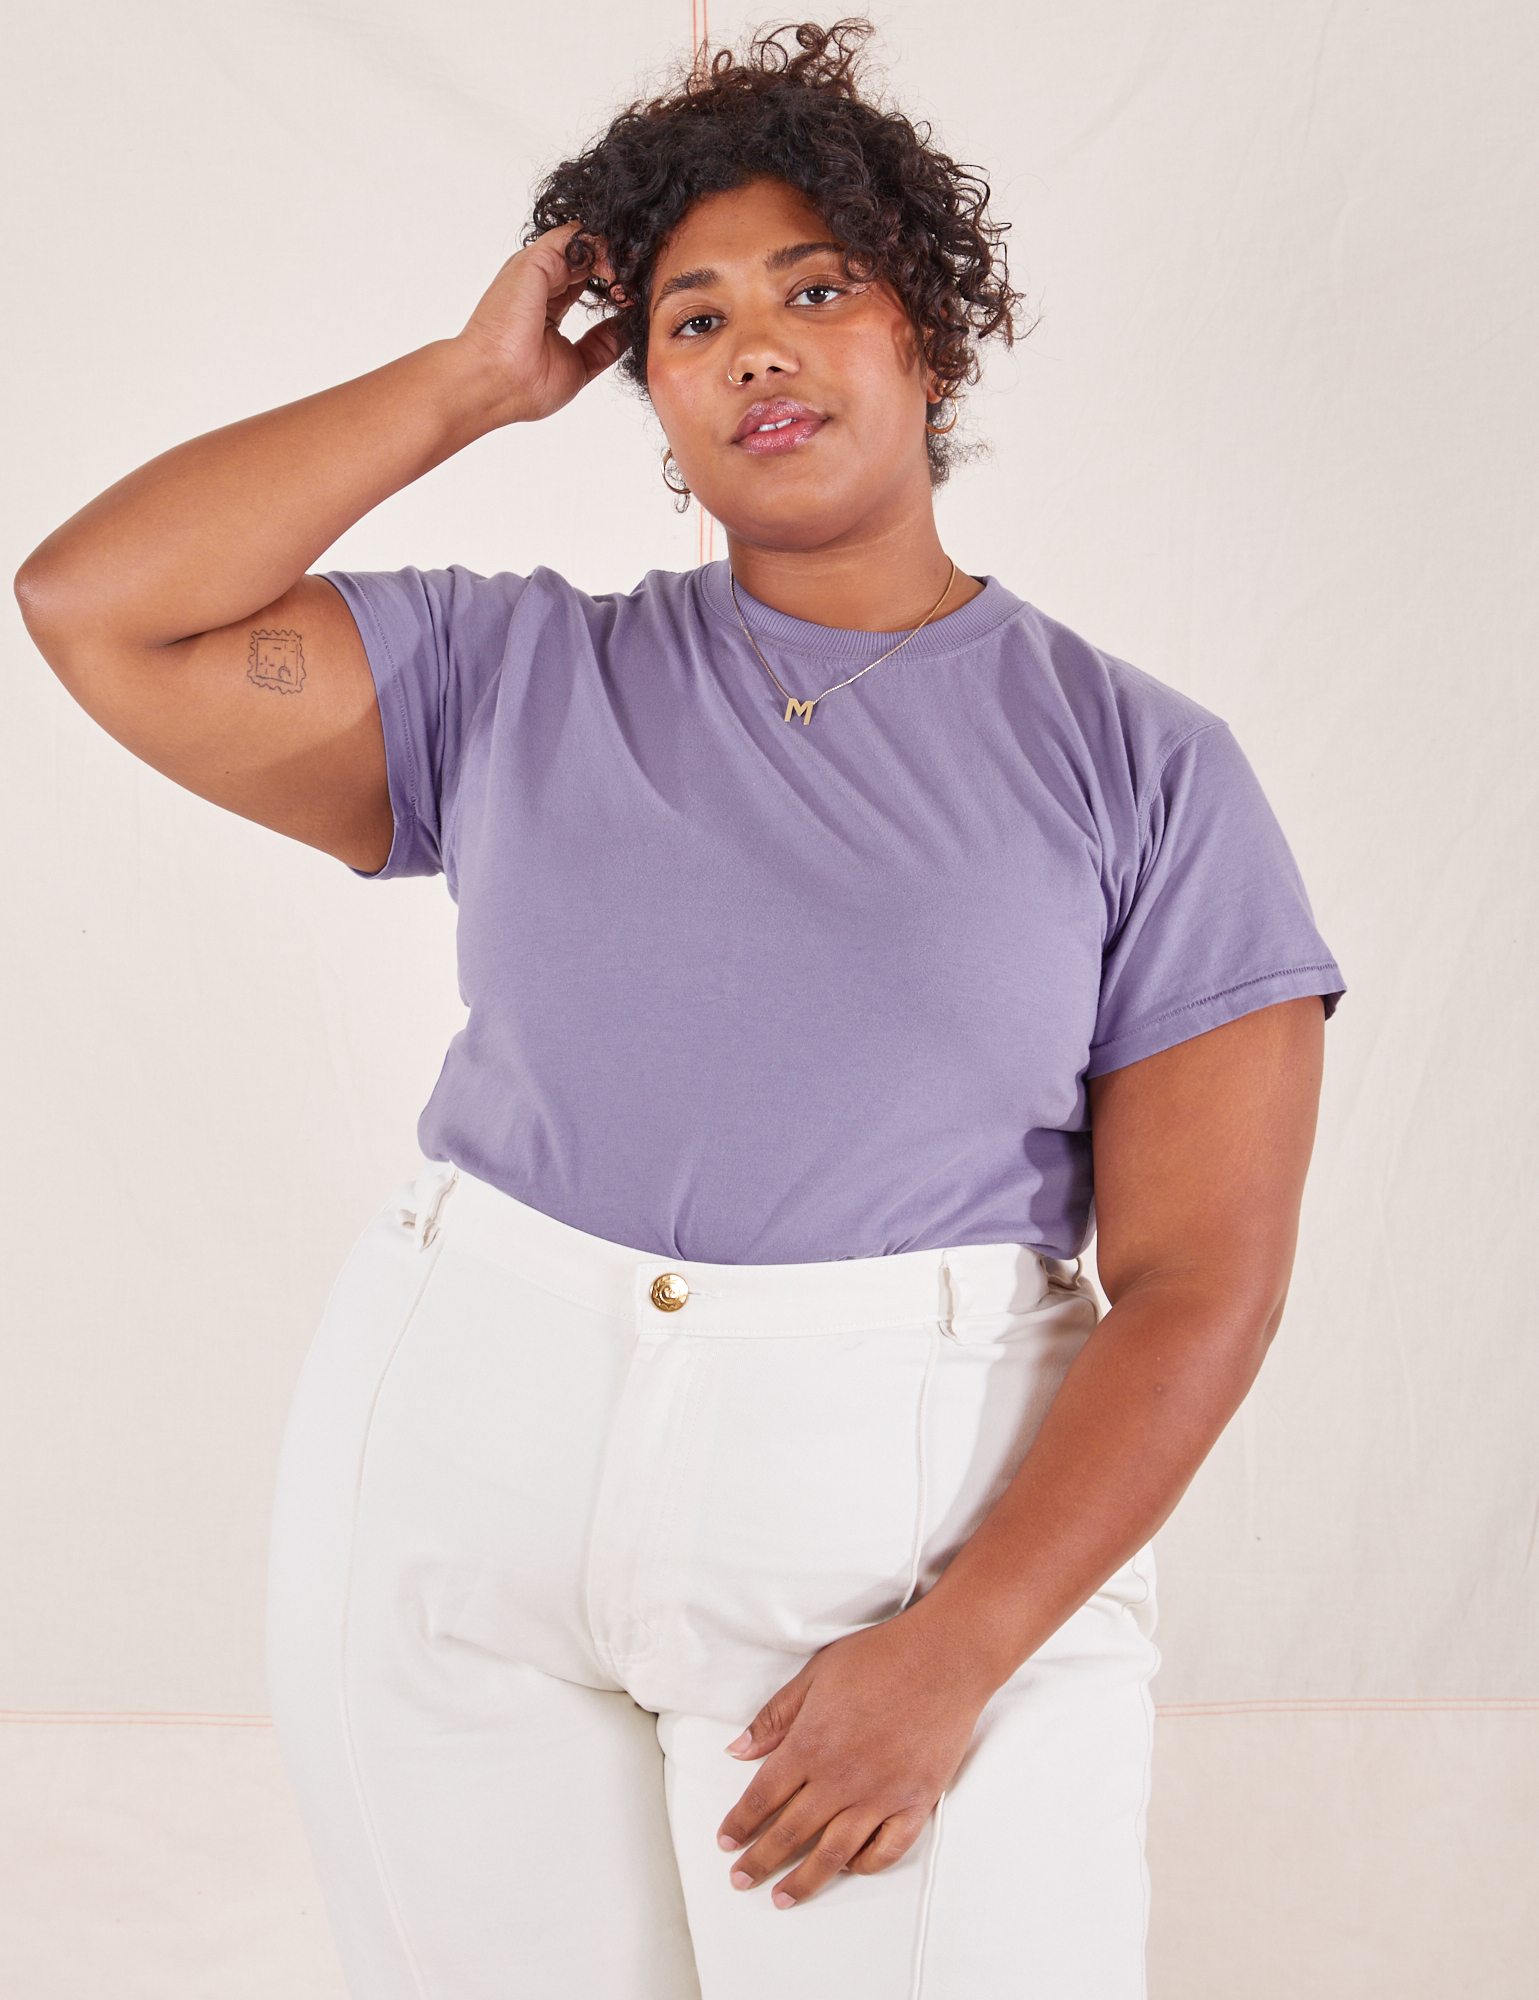 Morgan is wearing L Organic Vintage Tee in Faded Grape paired with vintage off-white Western Pants